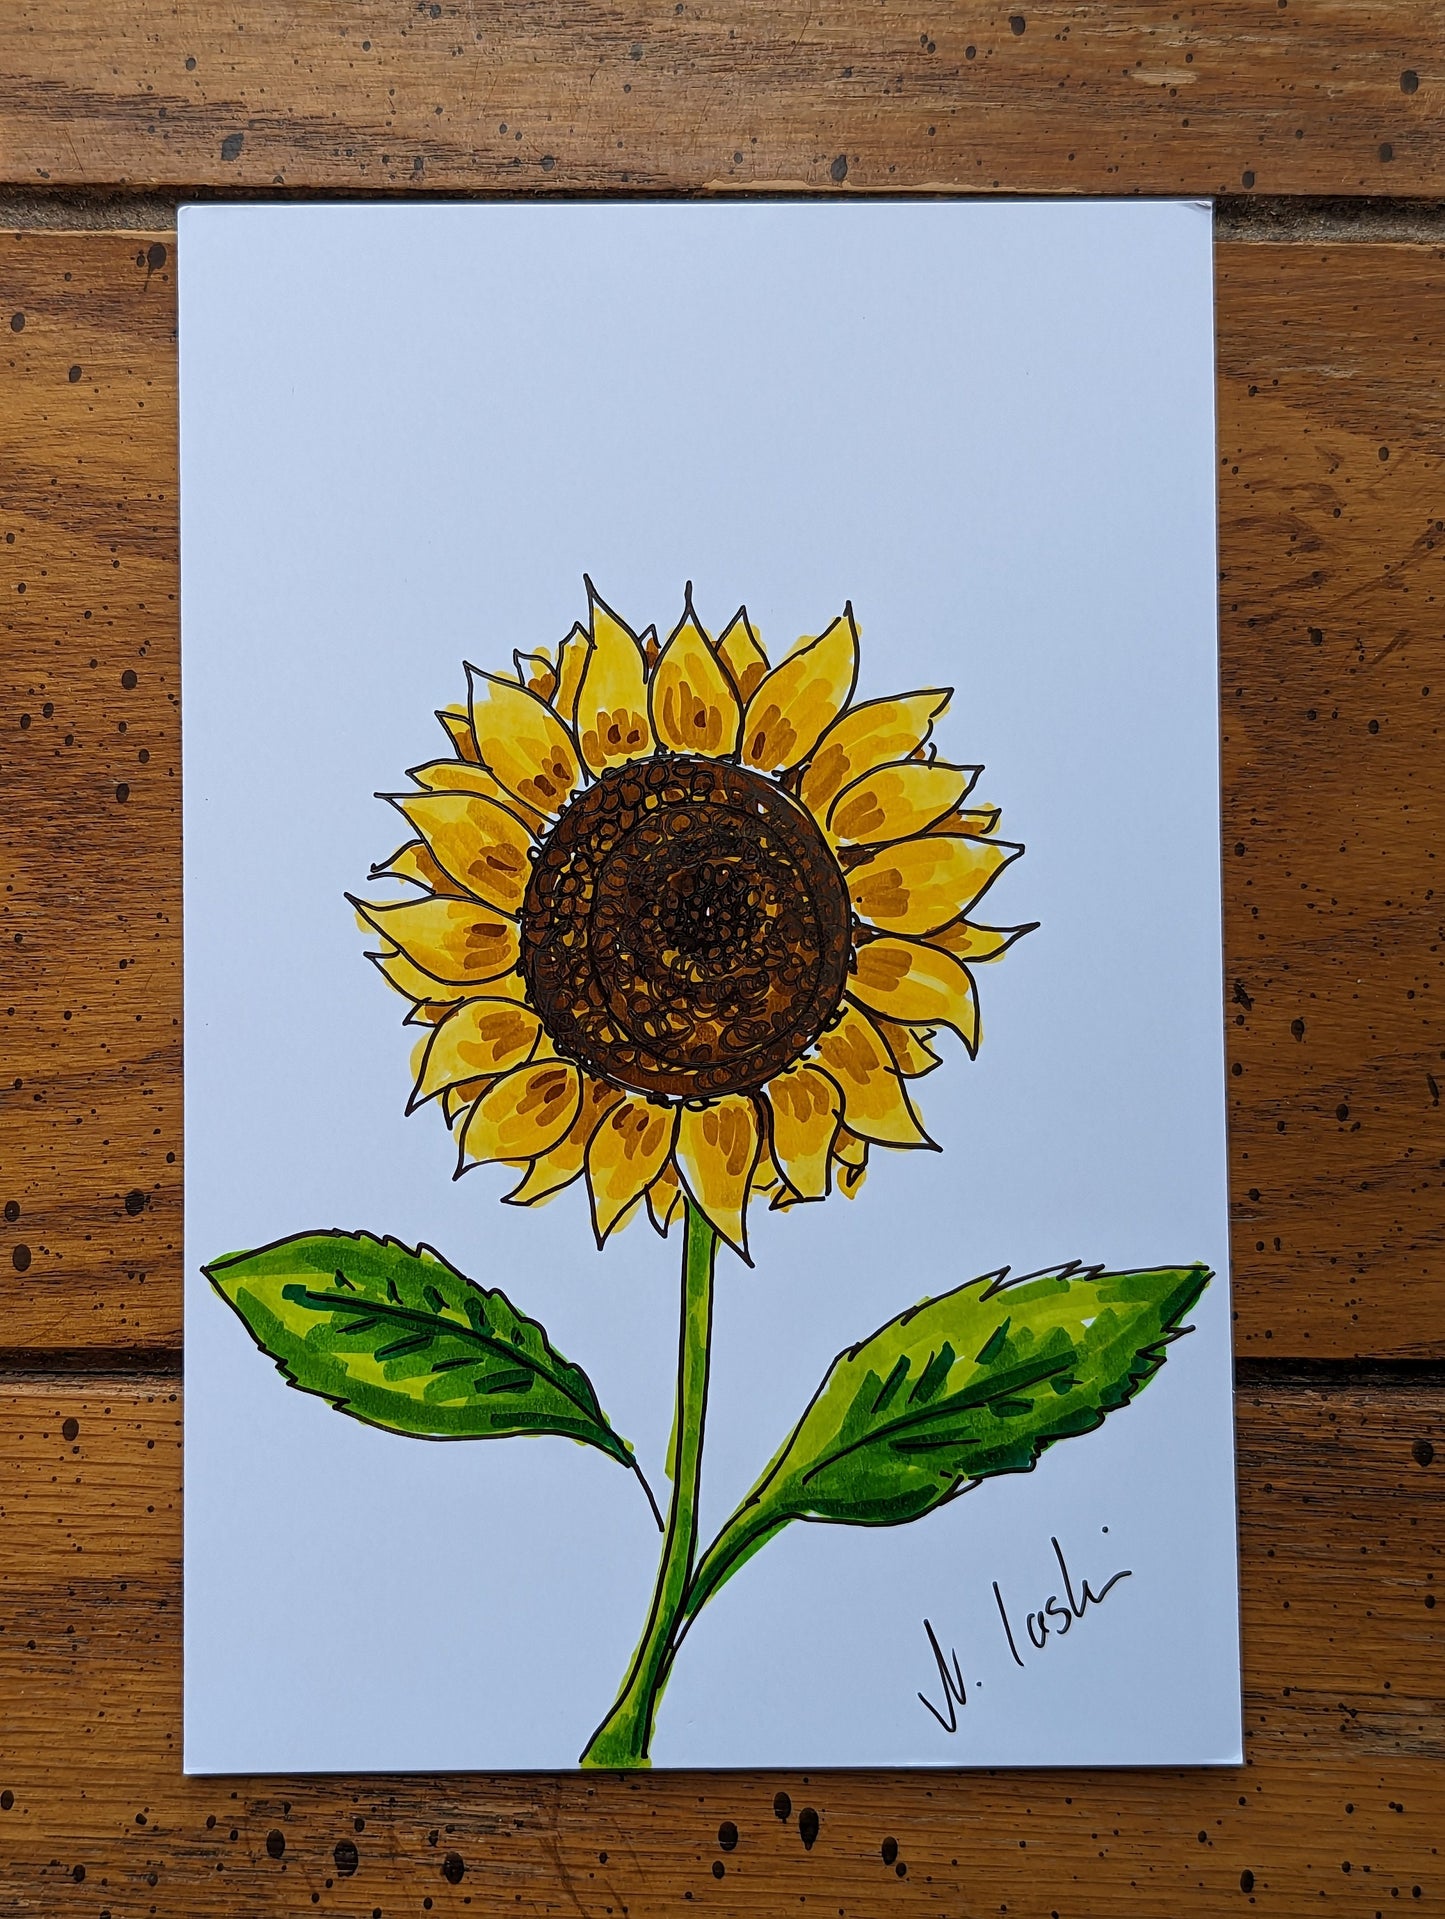 Original sunflower drawing made with alcohol ink on Glossy paper - 4 x6 inch mini drawing